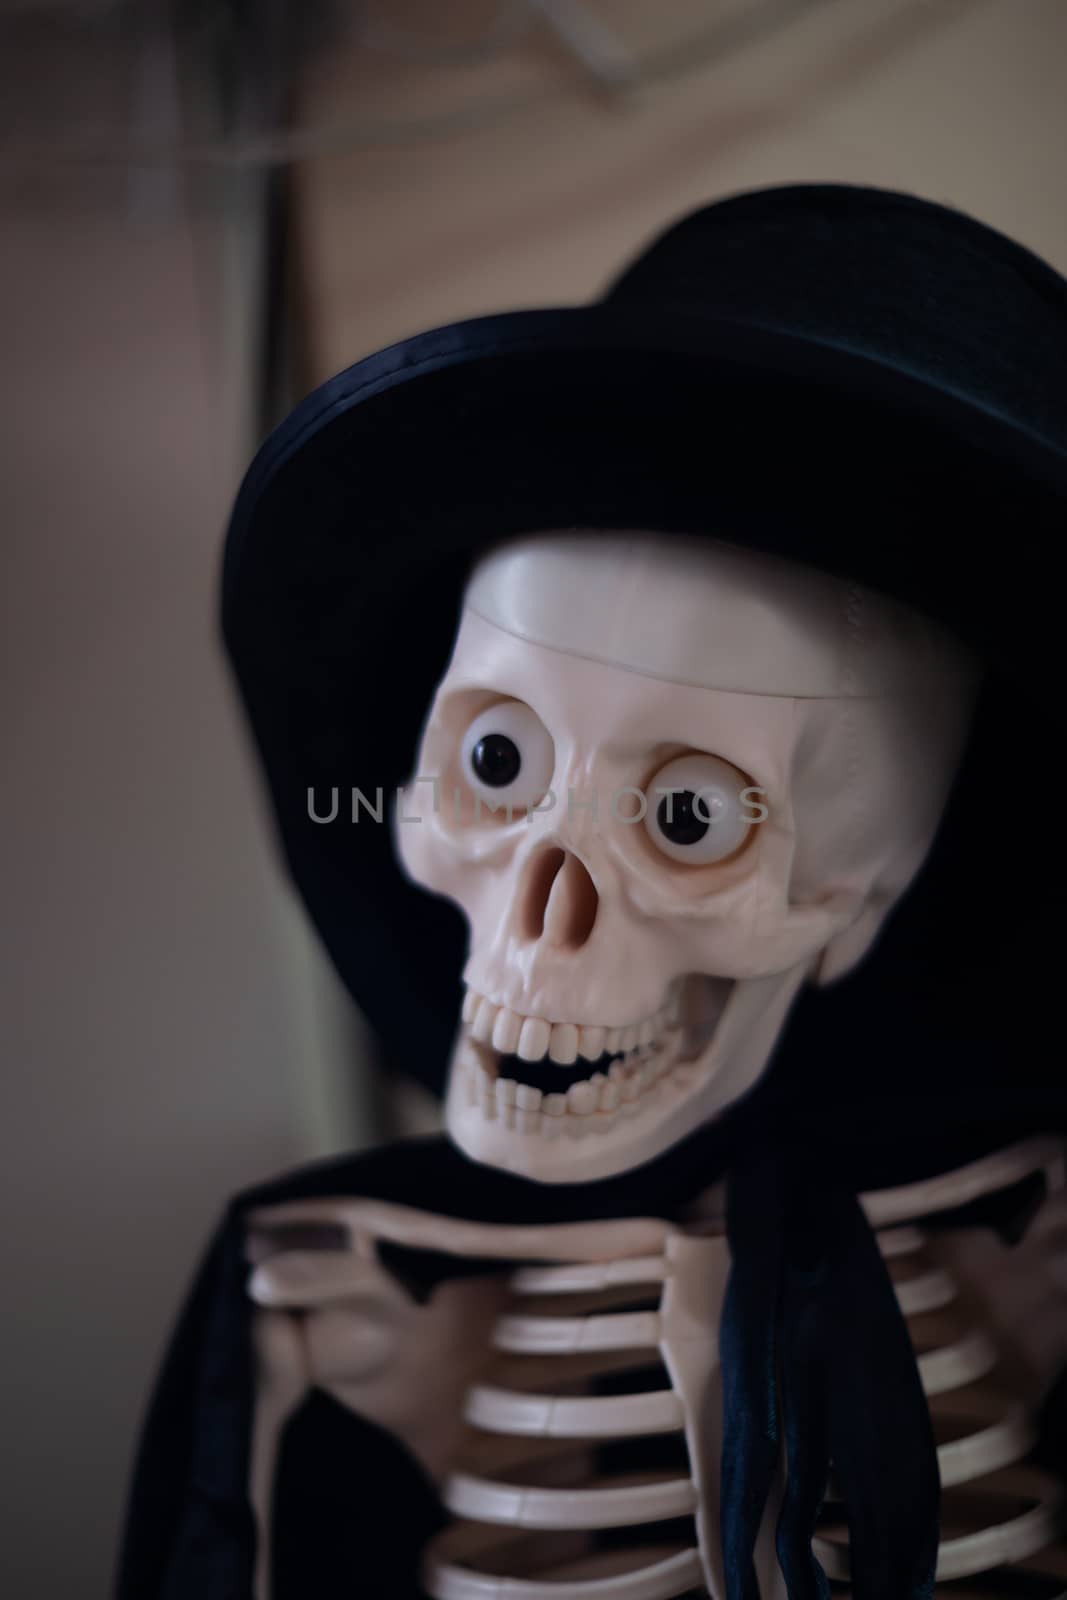 Skeleton with hat on head and cloak. Halloween decoration. Close-up view with blurred background.